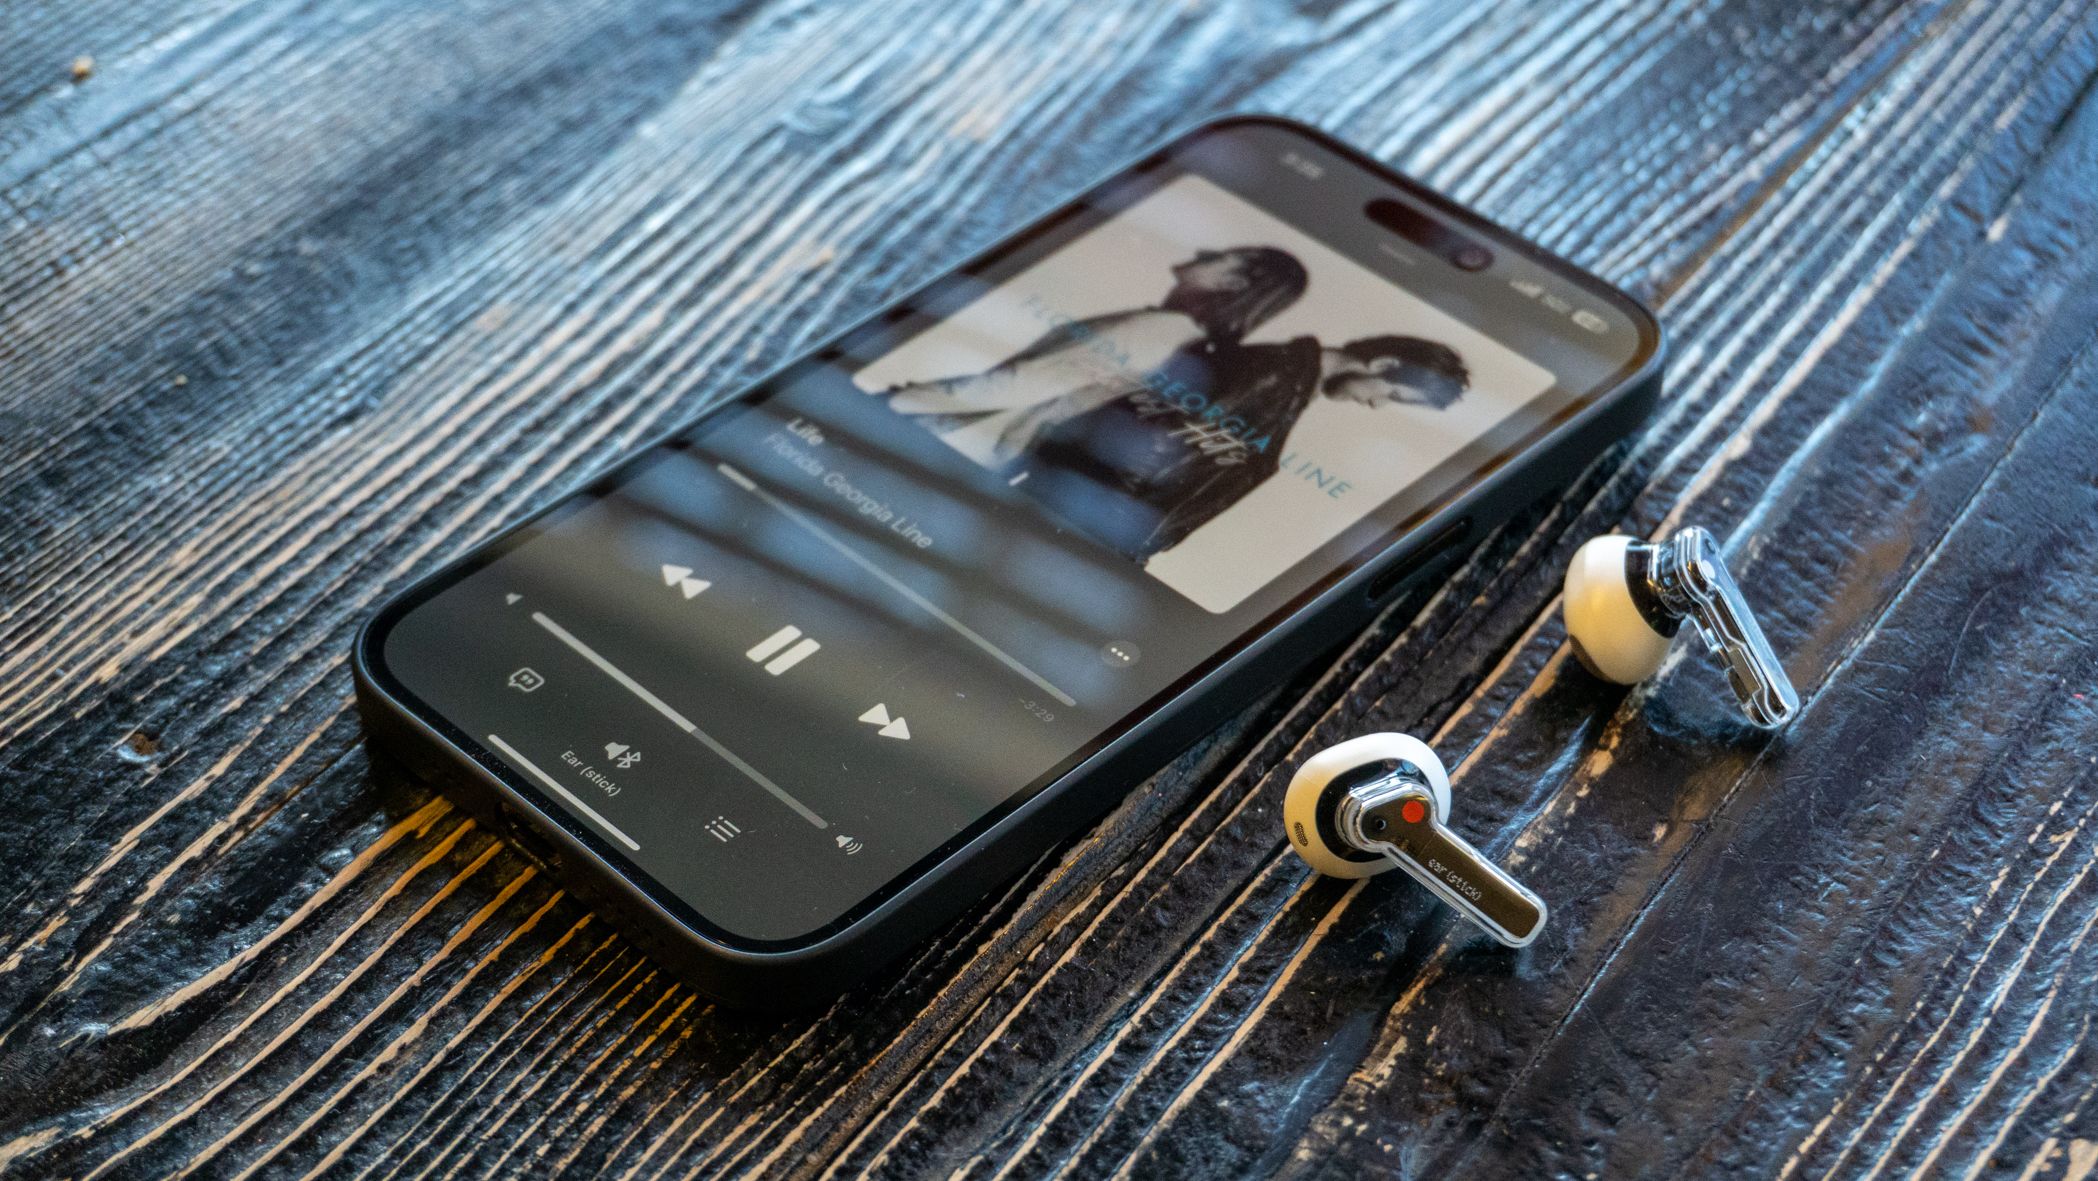 Nothing Ear (stick) review: A unique $99 pair of earbuds